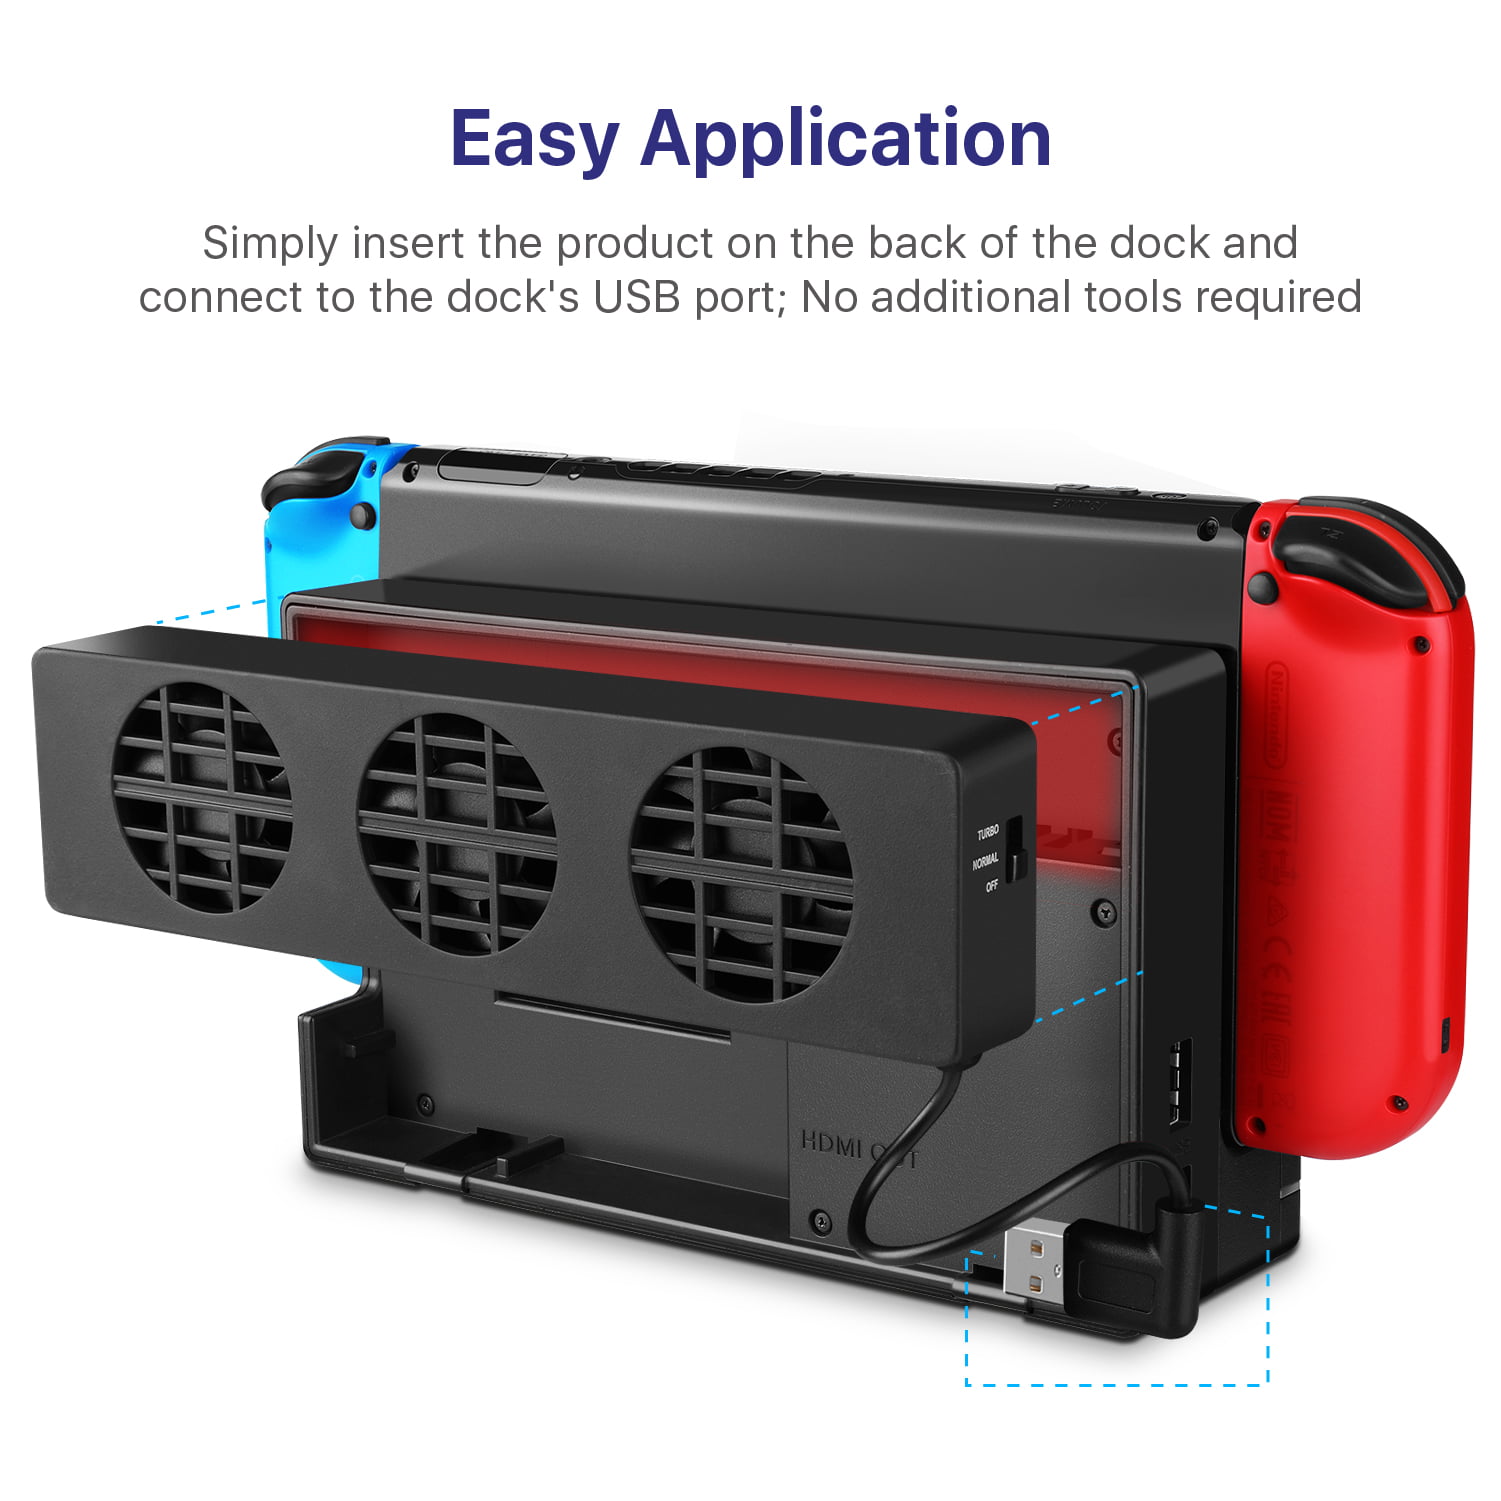 Nintendo Switch Cooling Fan - Mount Console Cooler w/ Fans, Adjustable Speed Temperature Station Pad, USB Heat Exhaust Ventilation, Gaming Accessories Original Switch Stand - Walmart.com